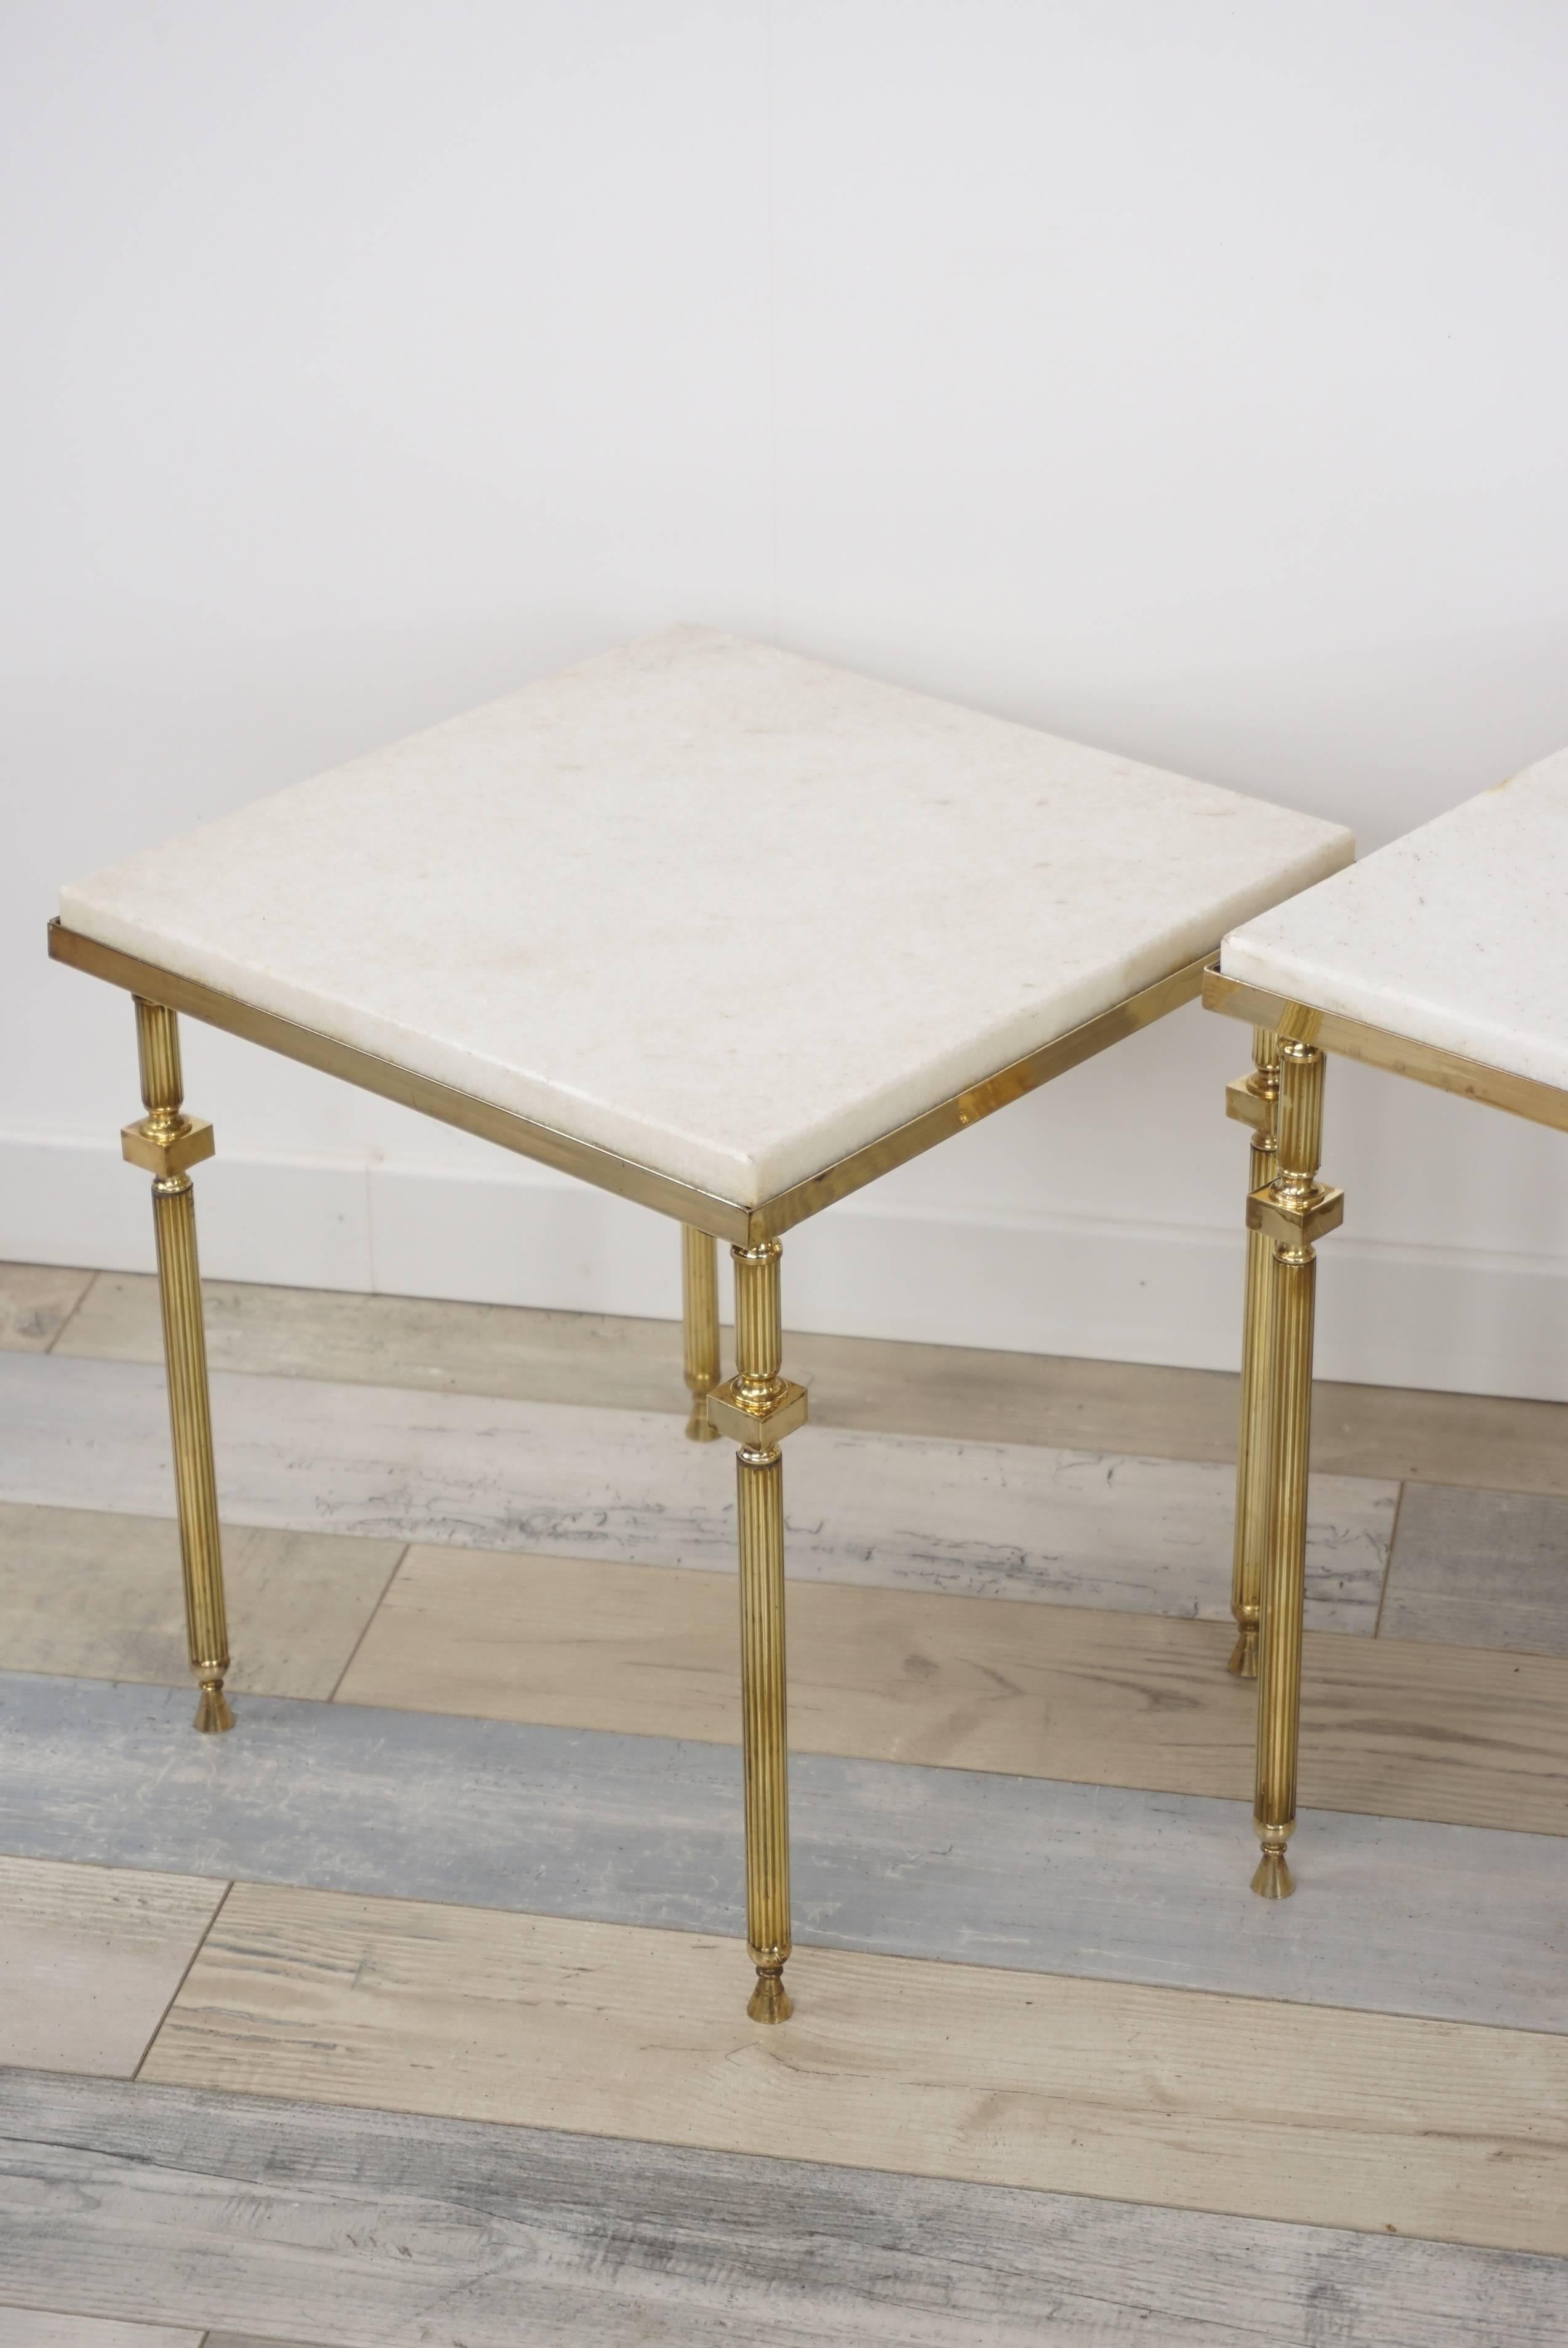 Brass and white marble set of nesting tables attributed to Maison Baguès (measure: H 44cm/ W 54.5cm/ D 39.5cm – H 40cm/ W 45.5cm/ D 36.5cm – H 37cm/ W 35.5cm/D 34.5cm).